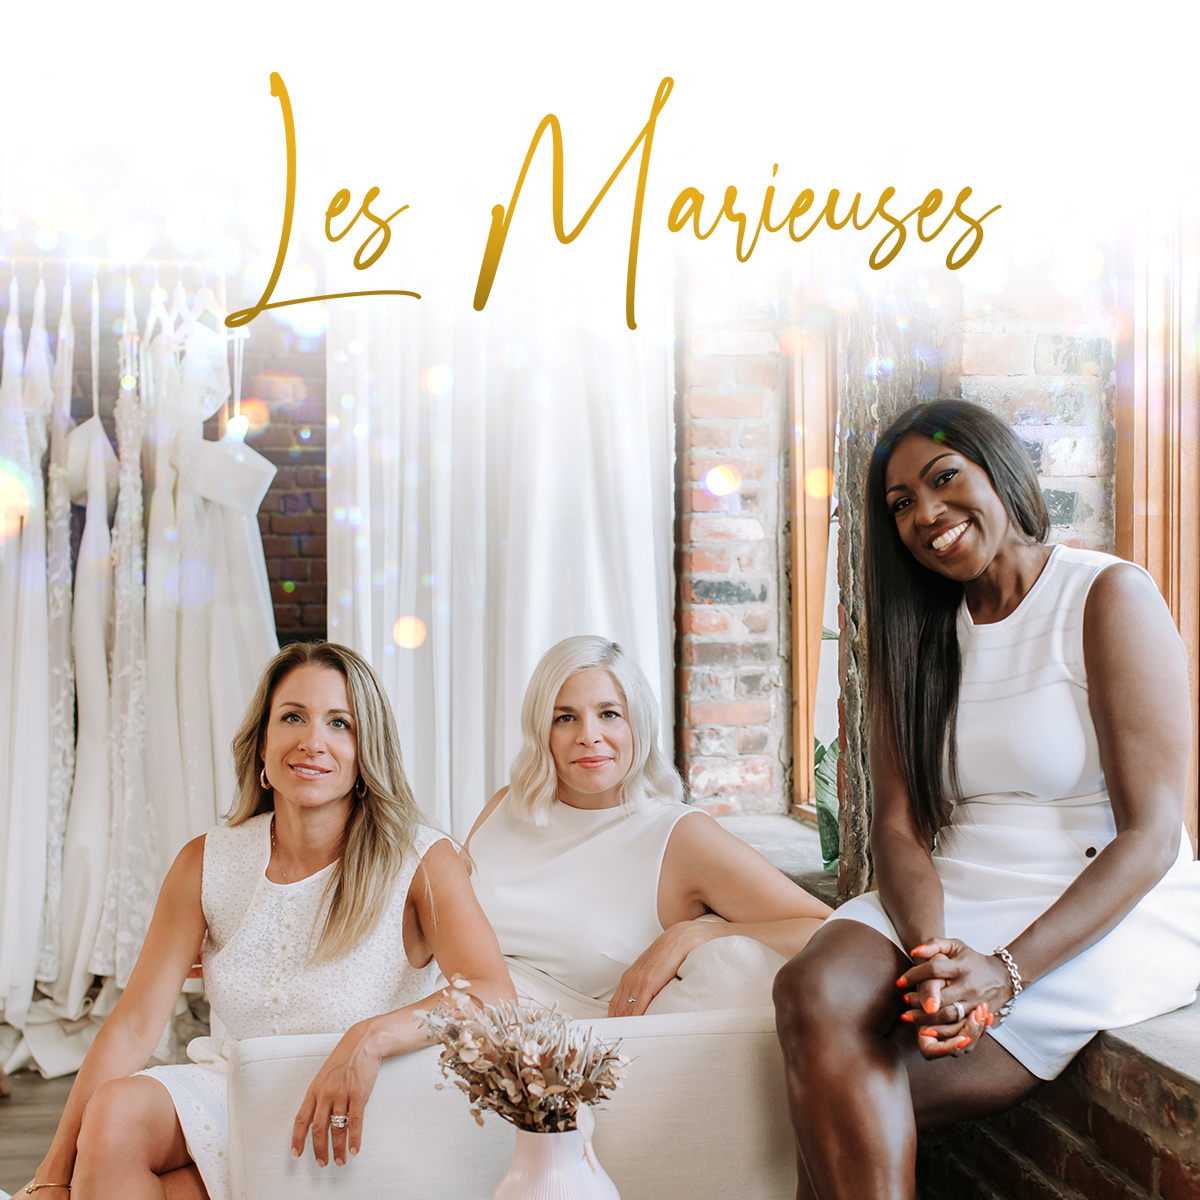 Wedding Planners (Les Marieuses)